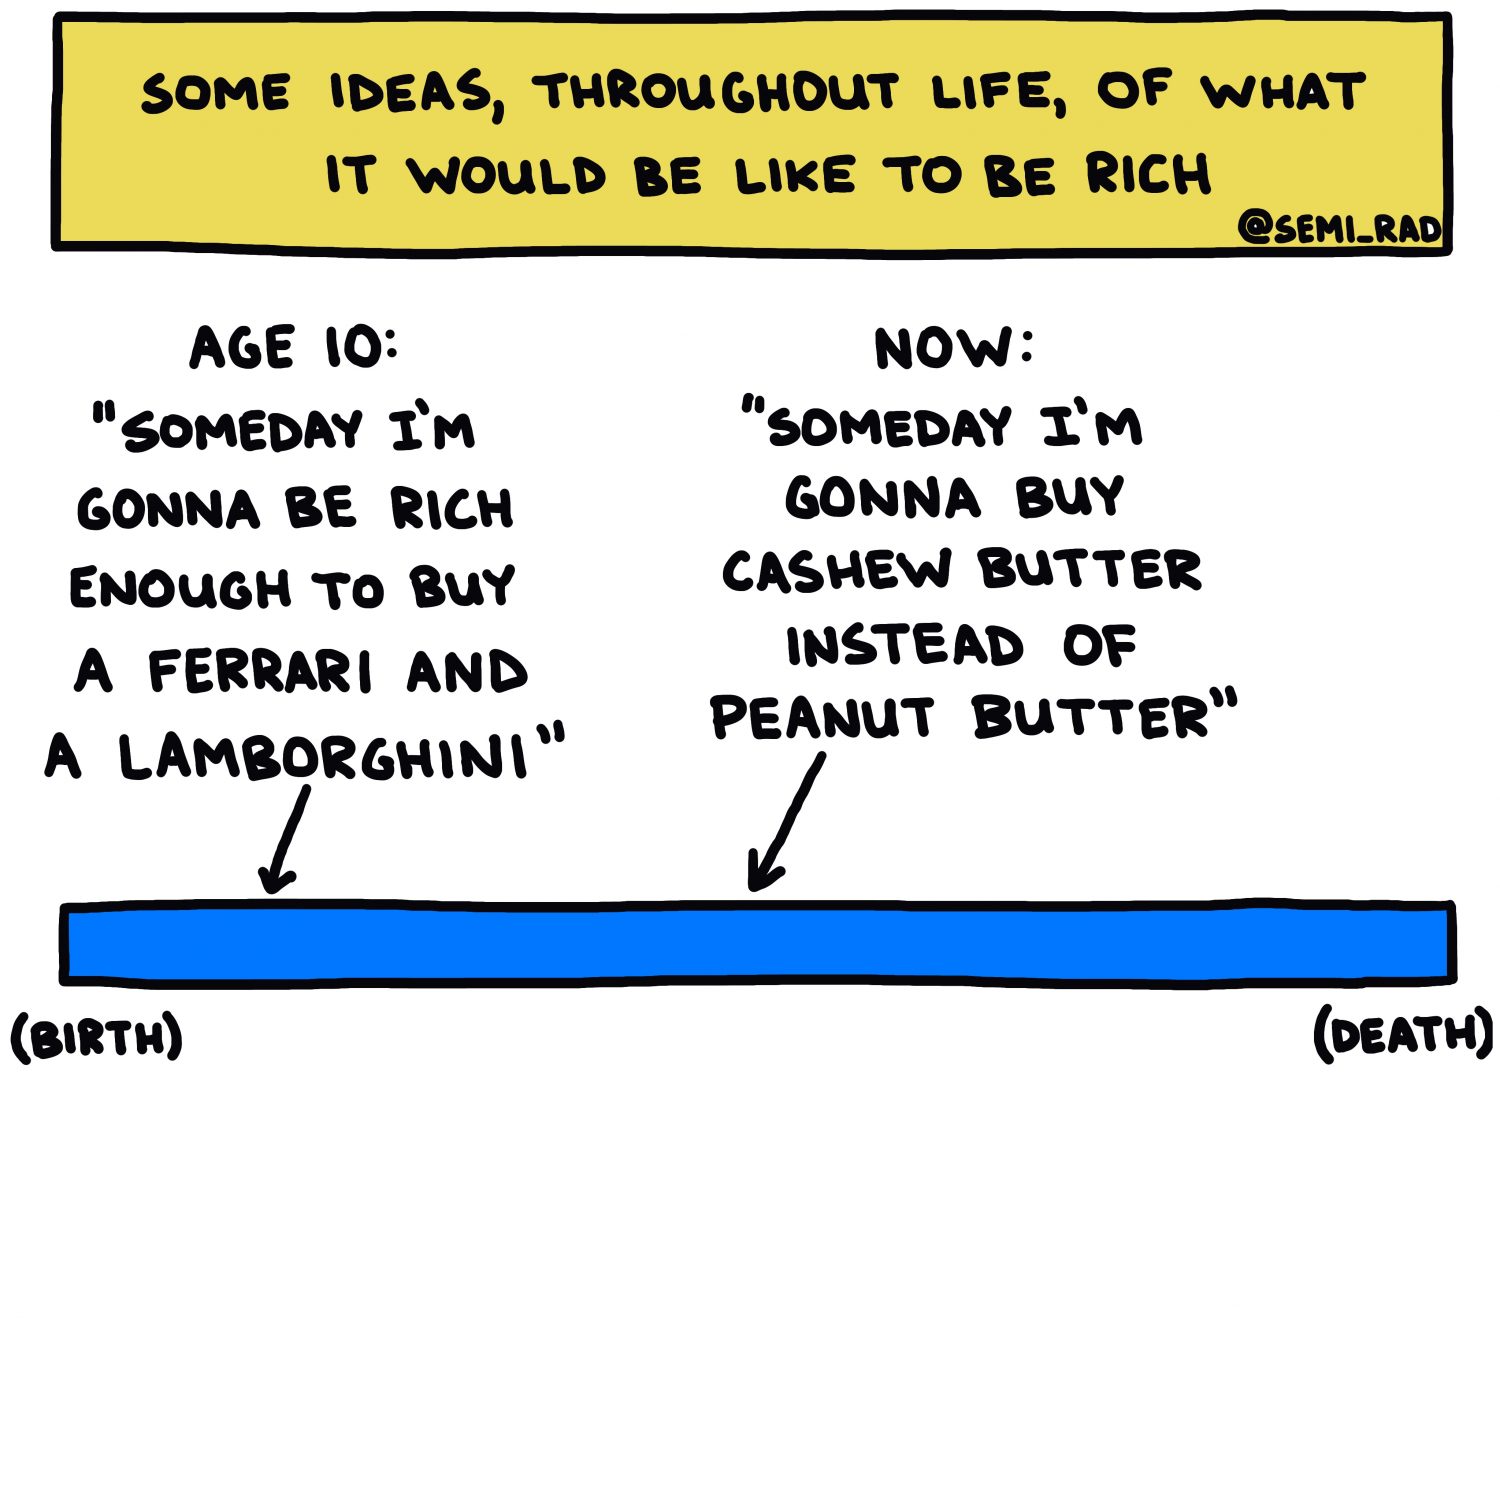 Some Ideas, Throughout Life, Of What It Would Be Like To Be Rich